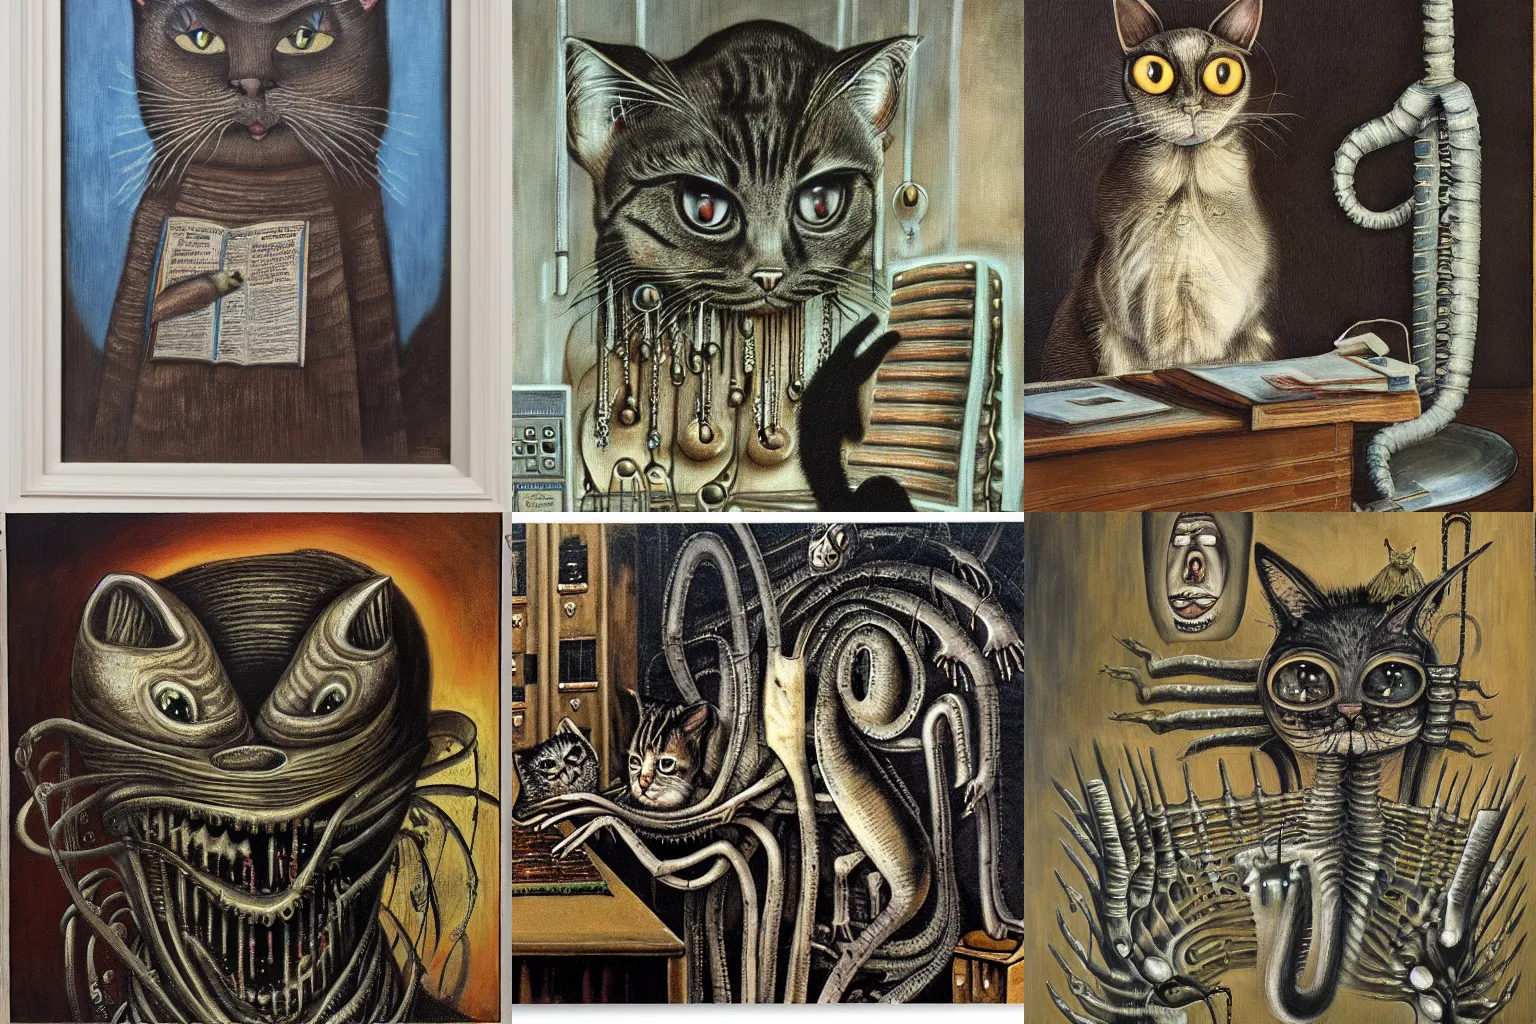 Prompt: the cat was the only reason the accounting department functioned at all, kid lit, HR Giger, oil on canvas